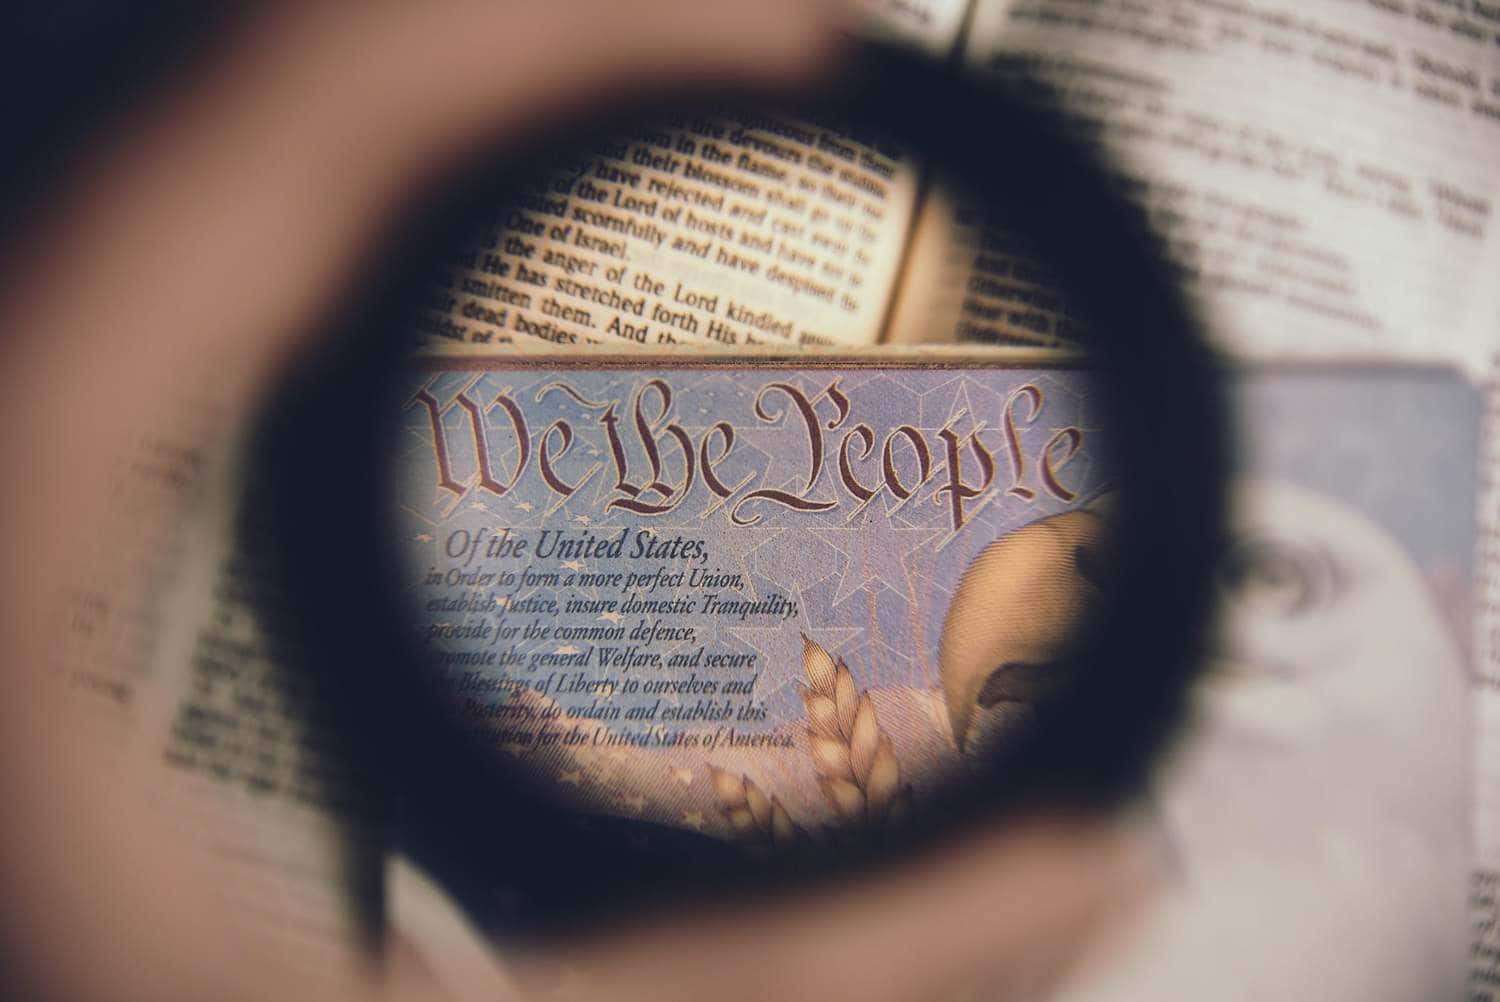 Looking through a magnifying lens, "We the People" from a copy of the U.S Constitution is visible over an open Bible